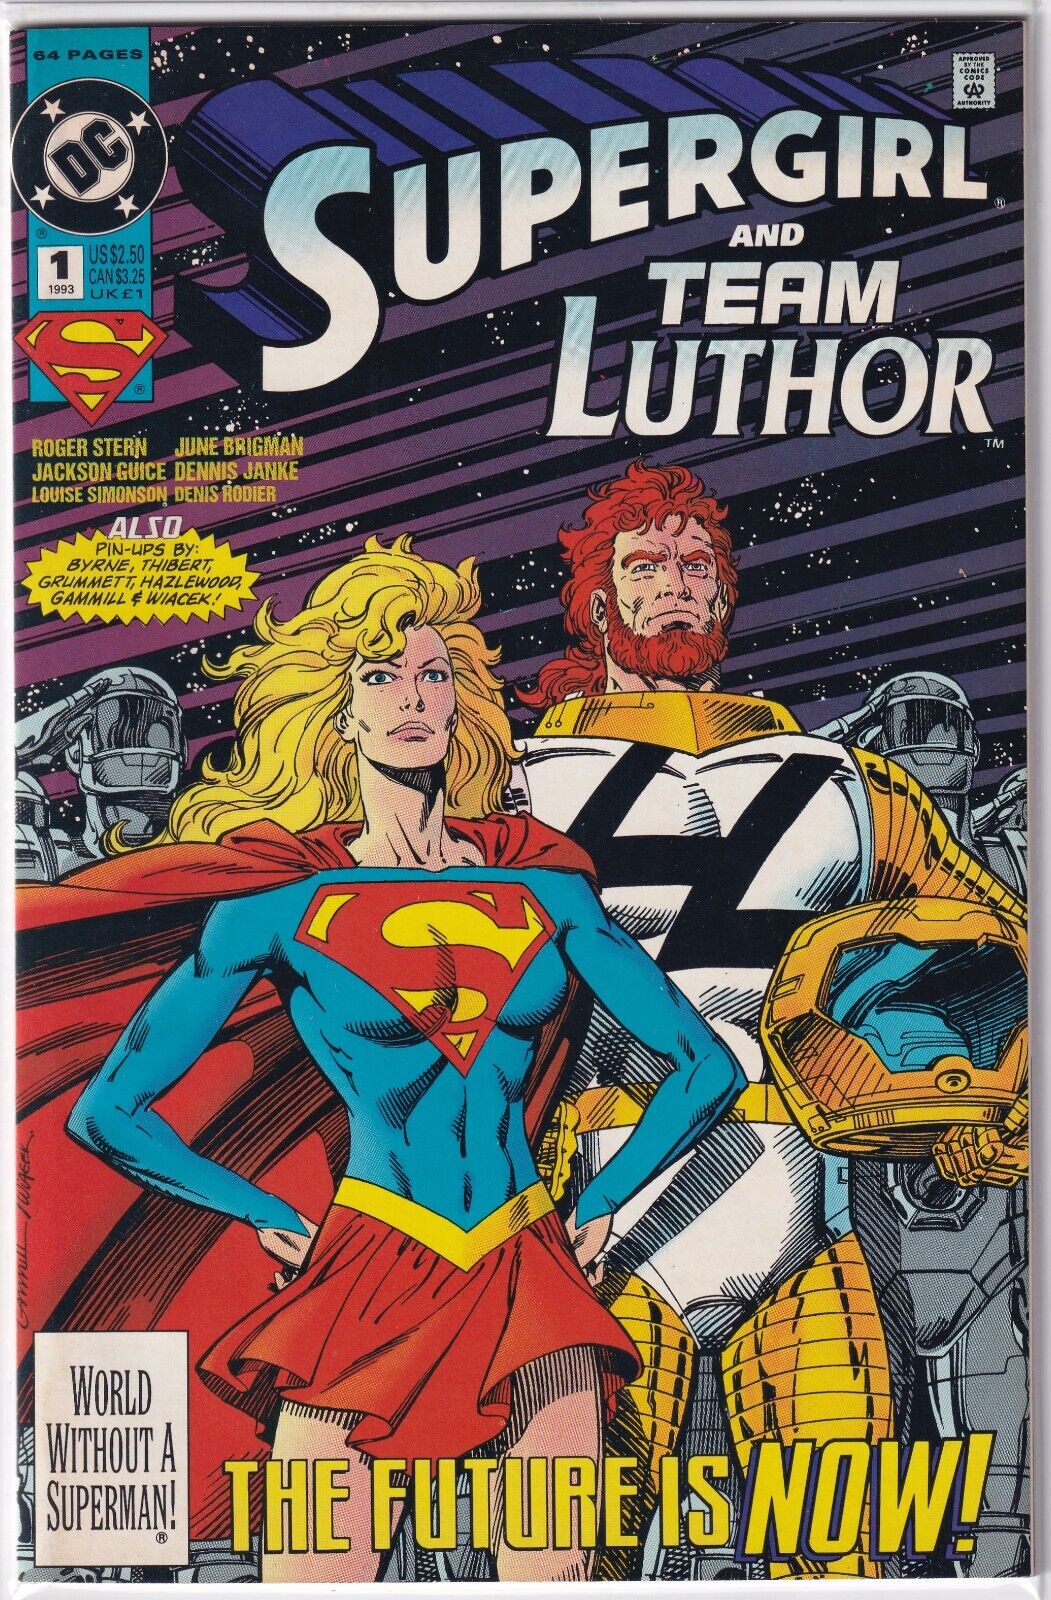 Supergirl and Team Luthor #1 The Future is Now (DC Comics, 1993)